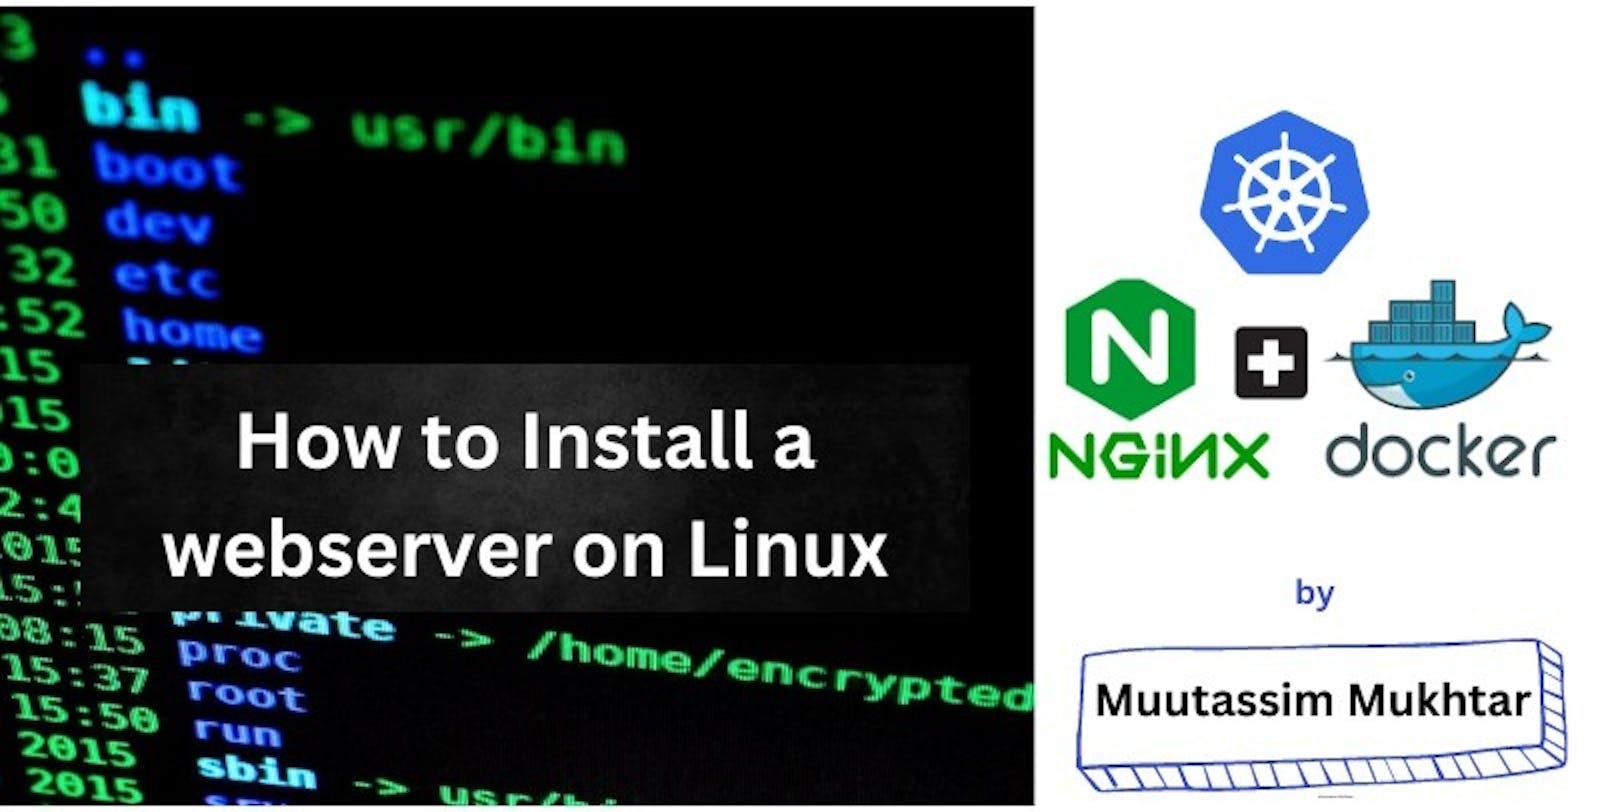 How to Install a webserver on Linux